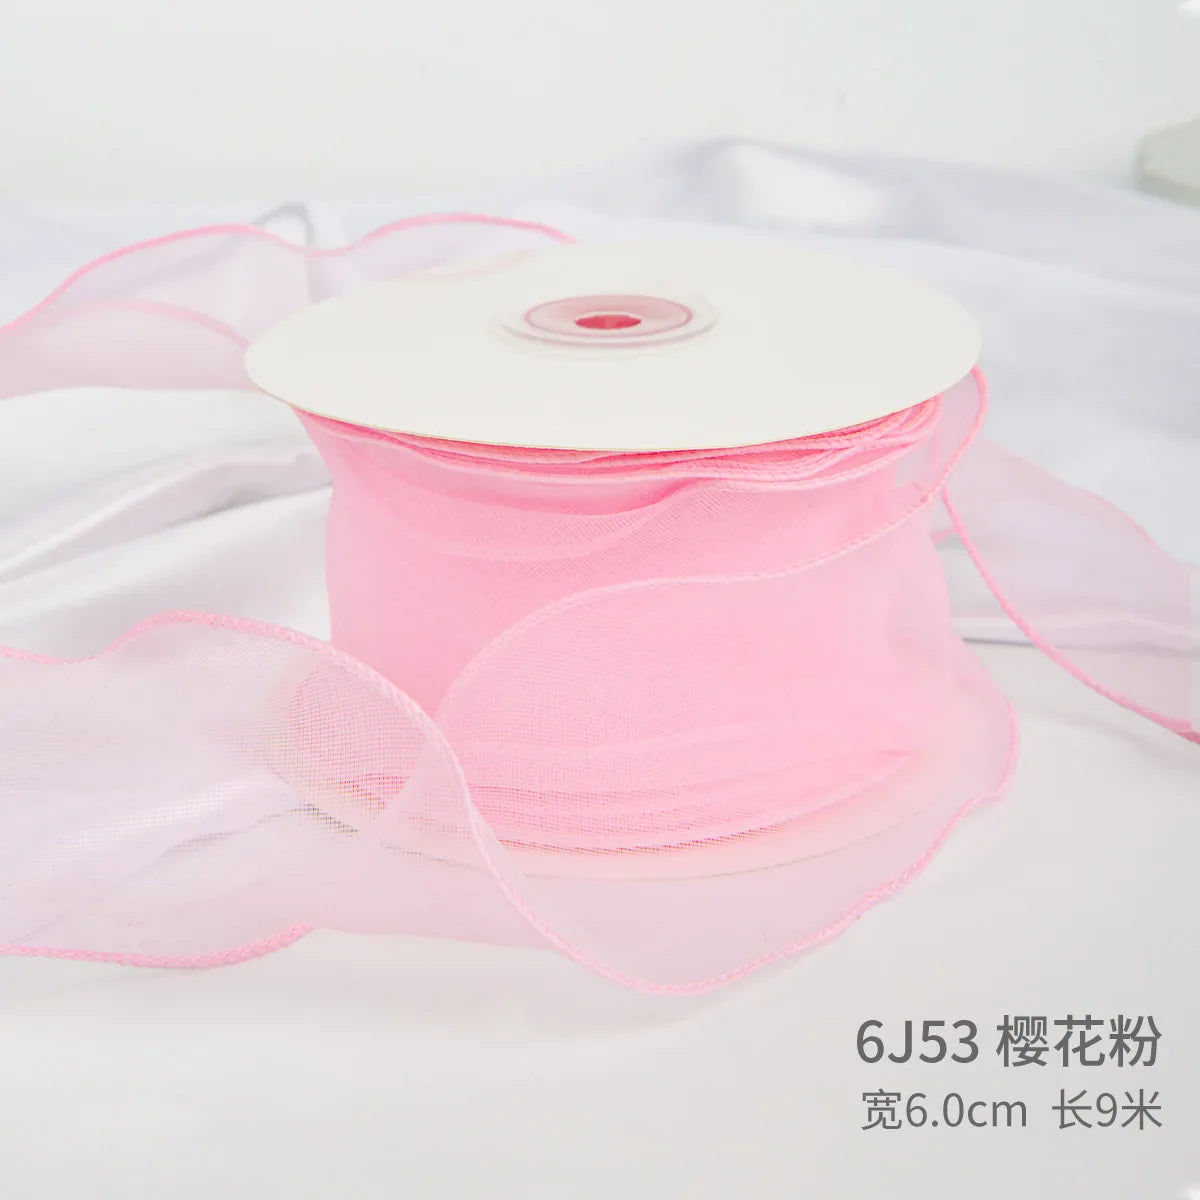 Edged Double Face Ribbon Tulle Sheer Chiffon Color Bow Ribbon，2.36 inch - 10 yards